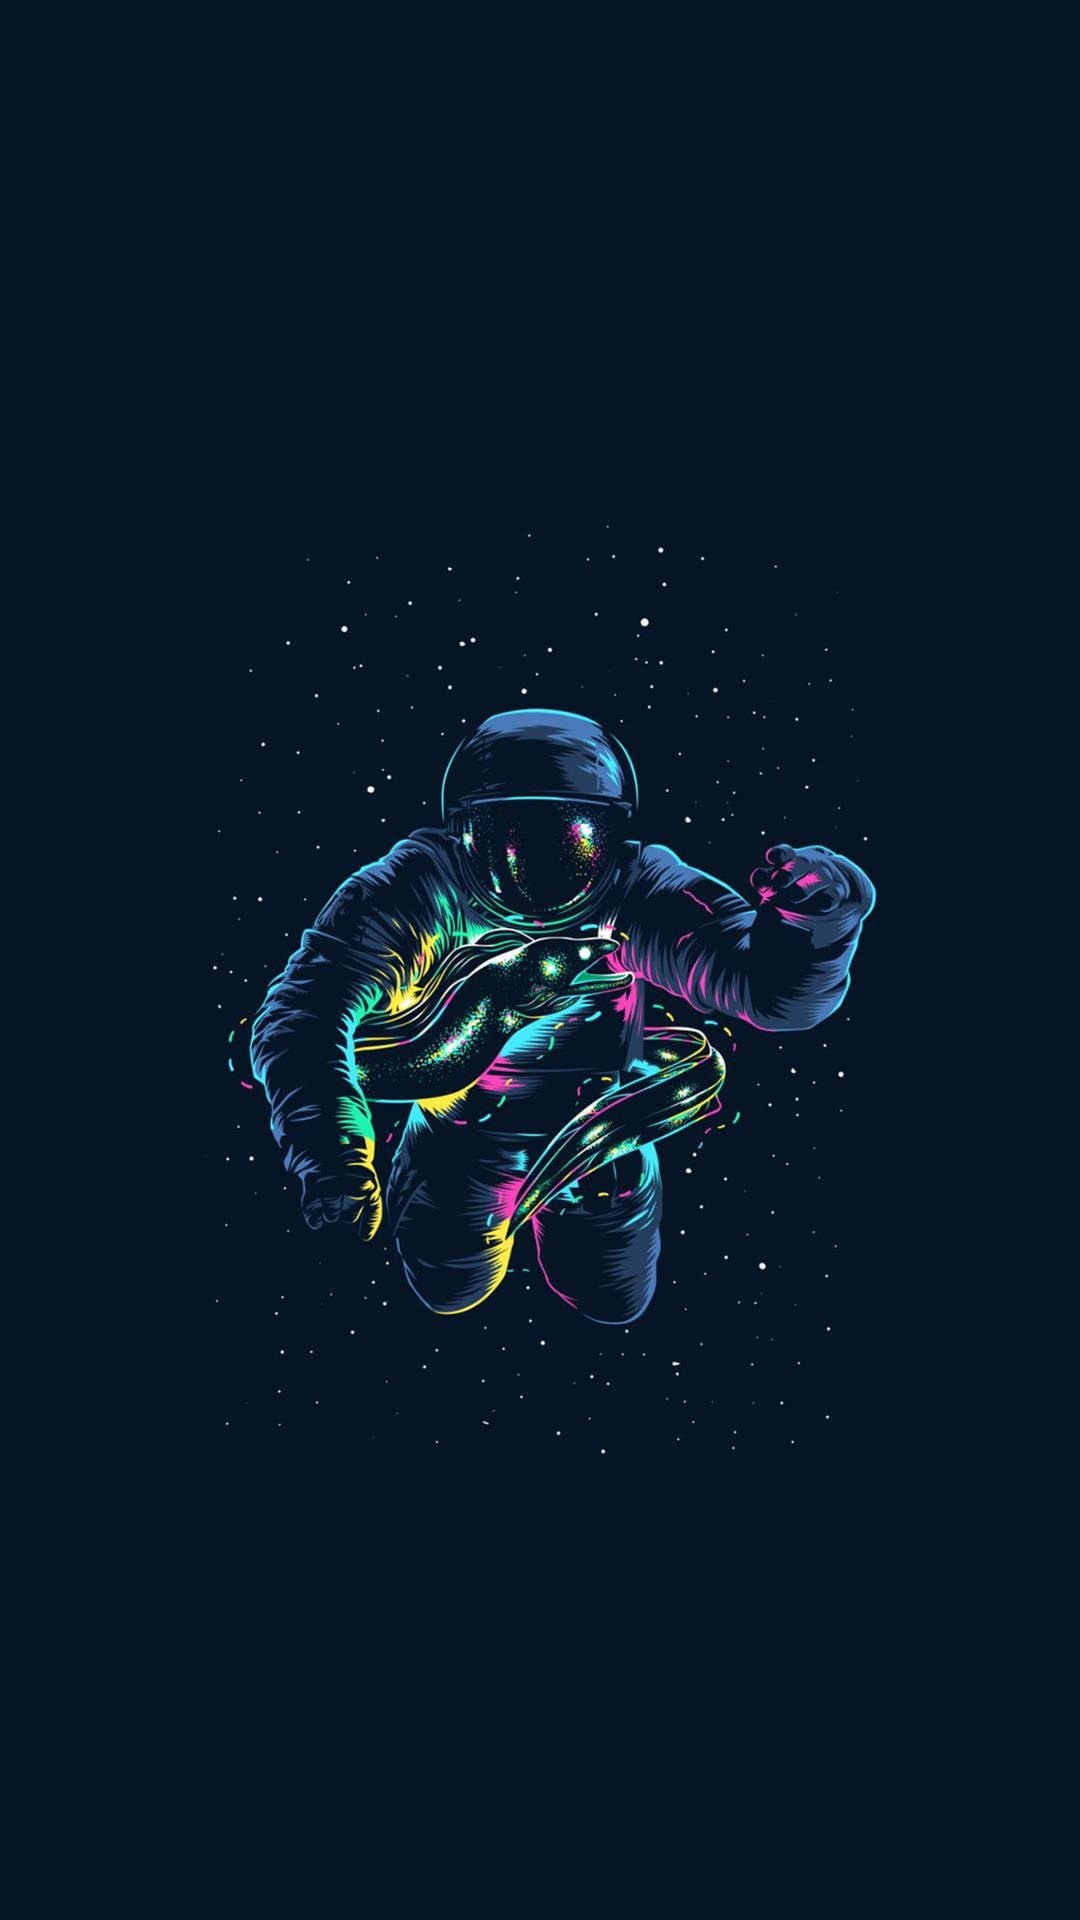 Black And White Astronaut Neon Colors Wallpaper